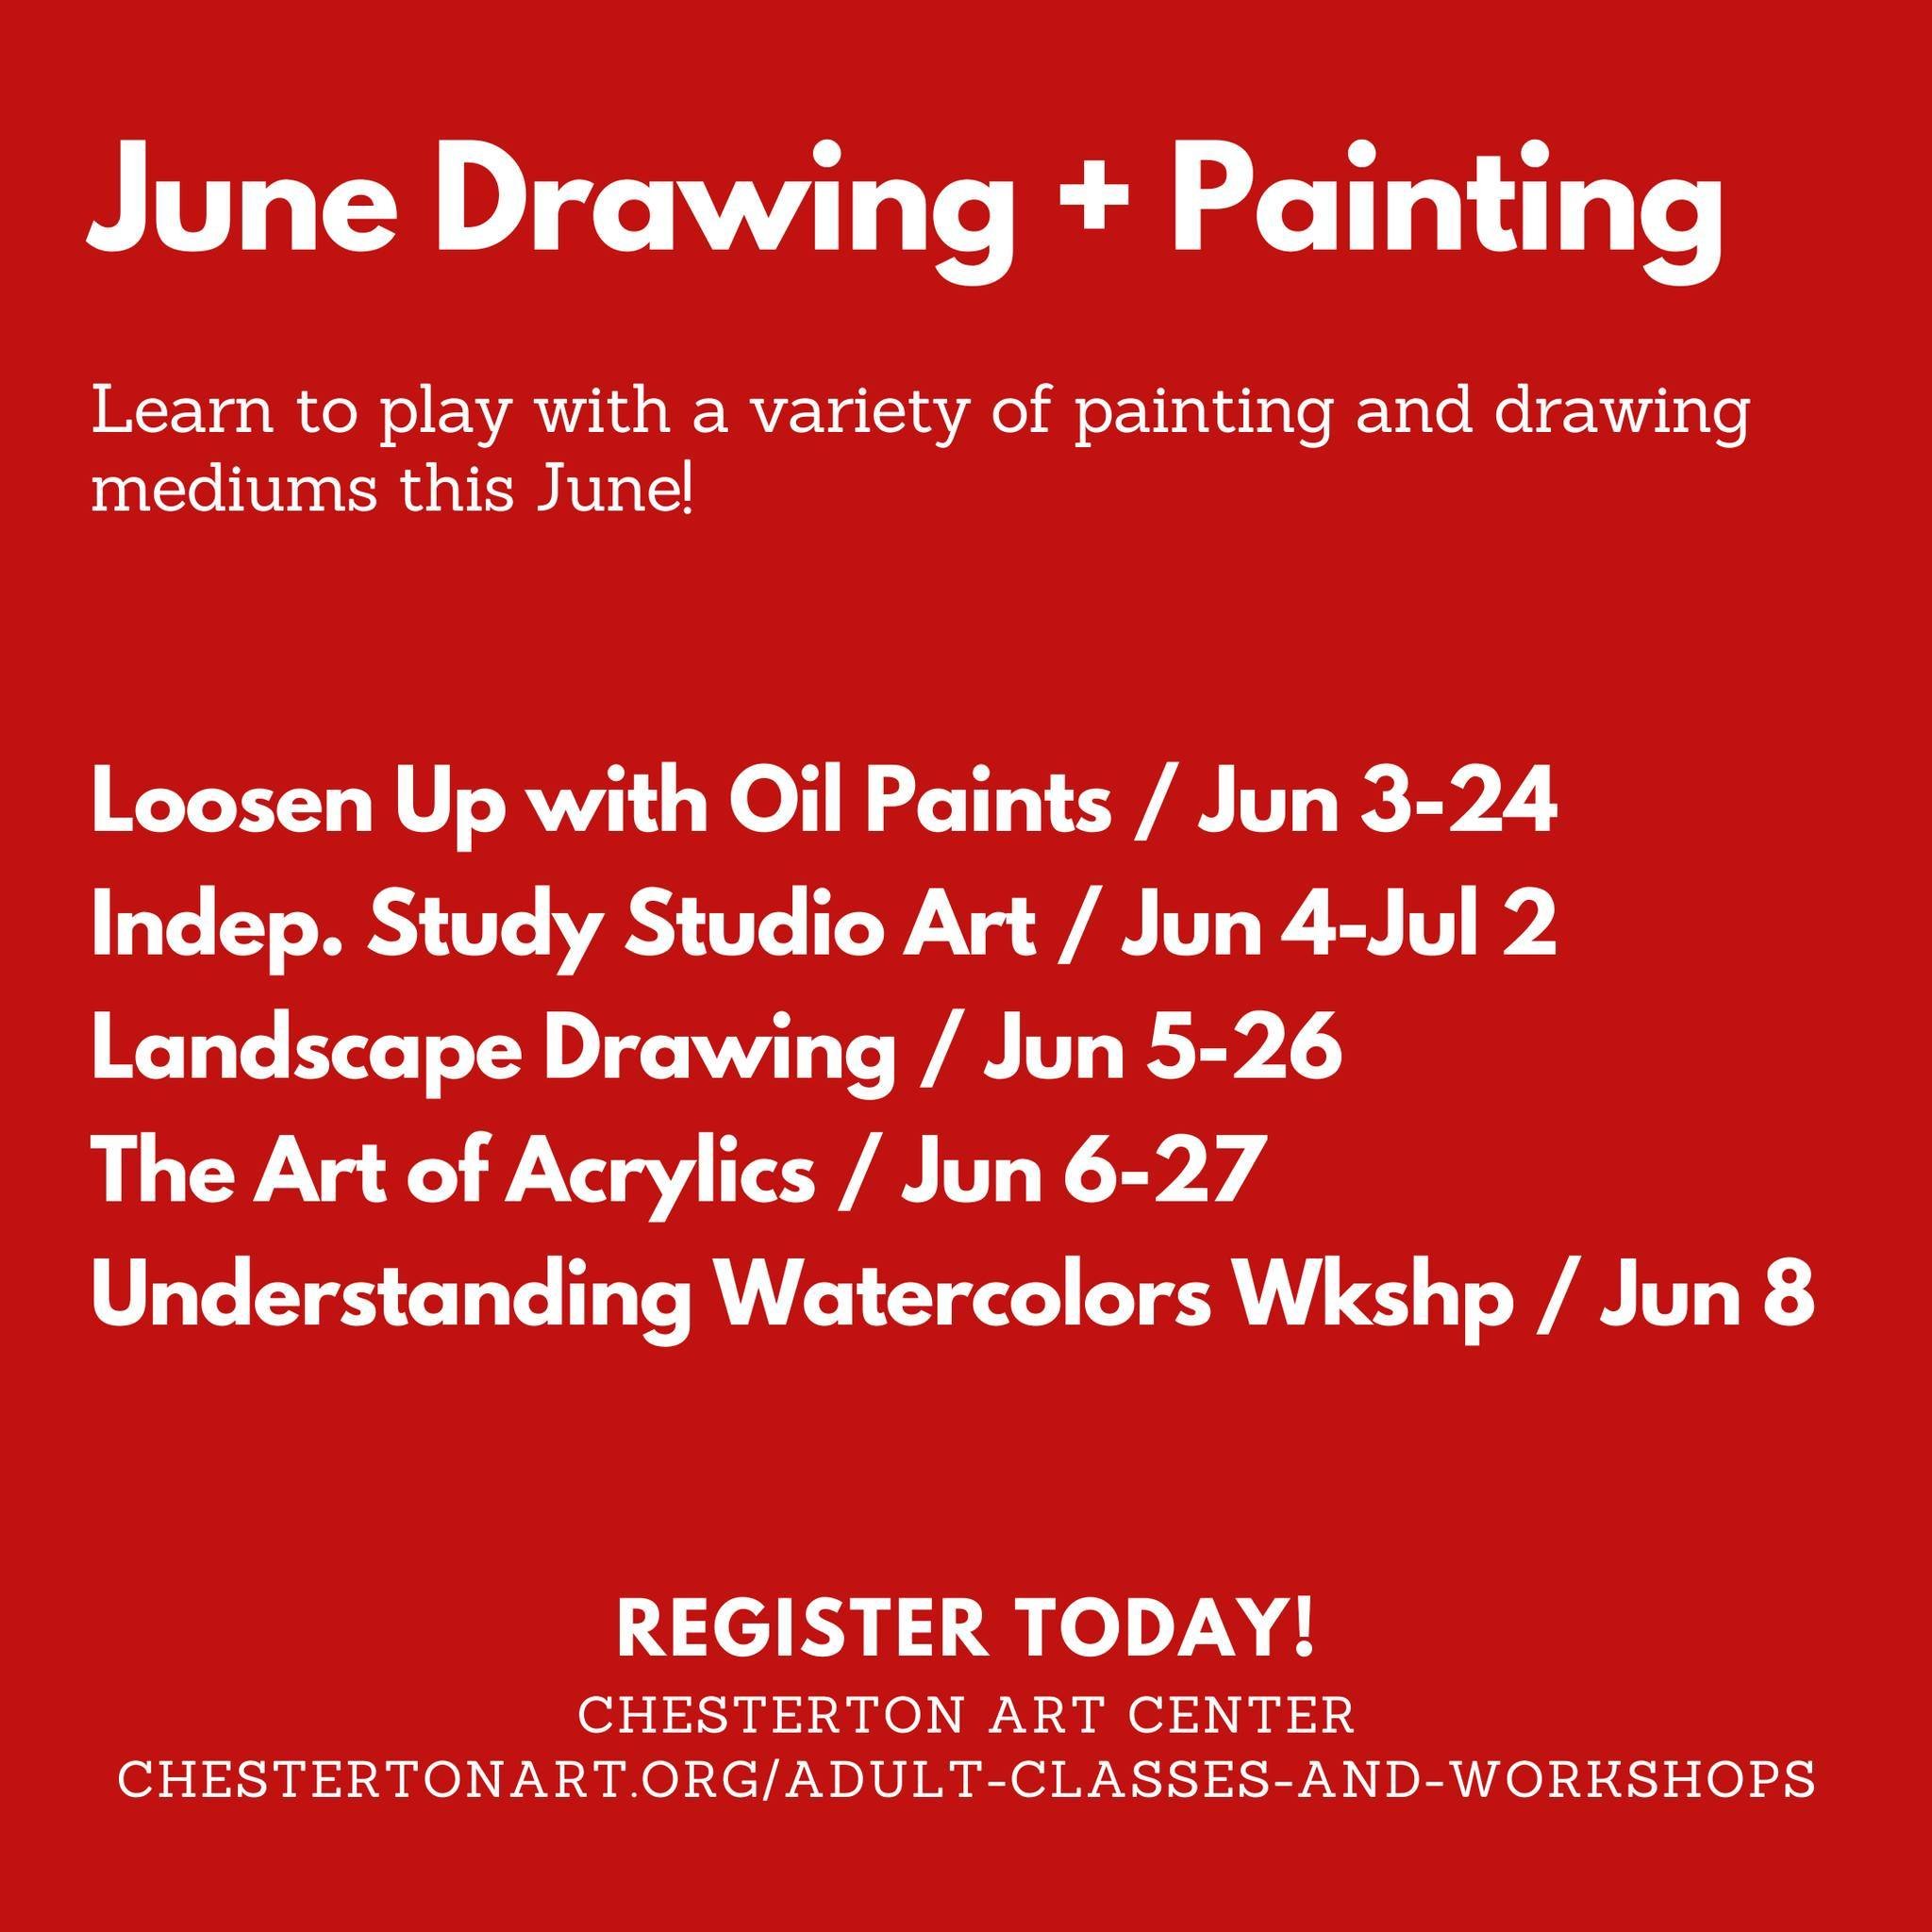 Play with paints, watercolor and drawing during the month of June! Register today for CAC's Drawing + Painting Classes and Workshops.

🔴 For more information and registration visit our website https://www.chestertonart.org/adult-classes-and-workshop